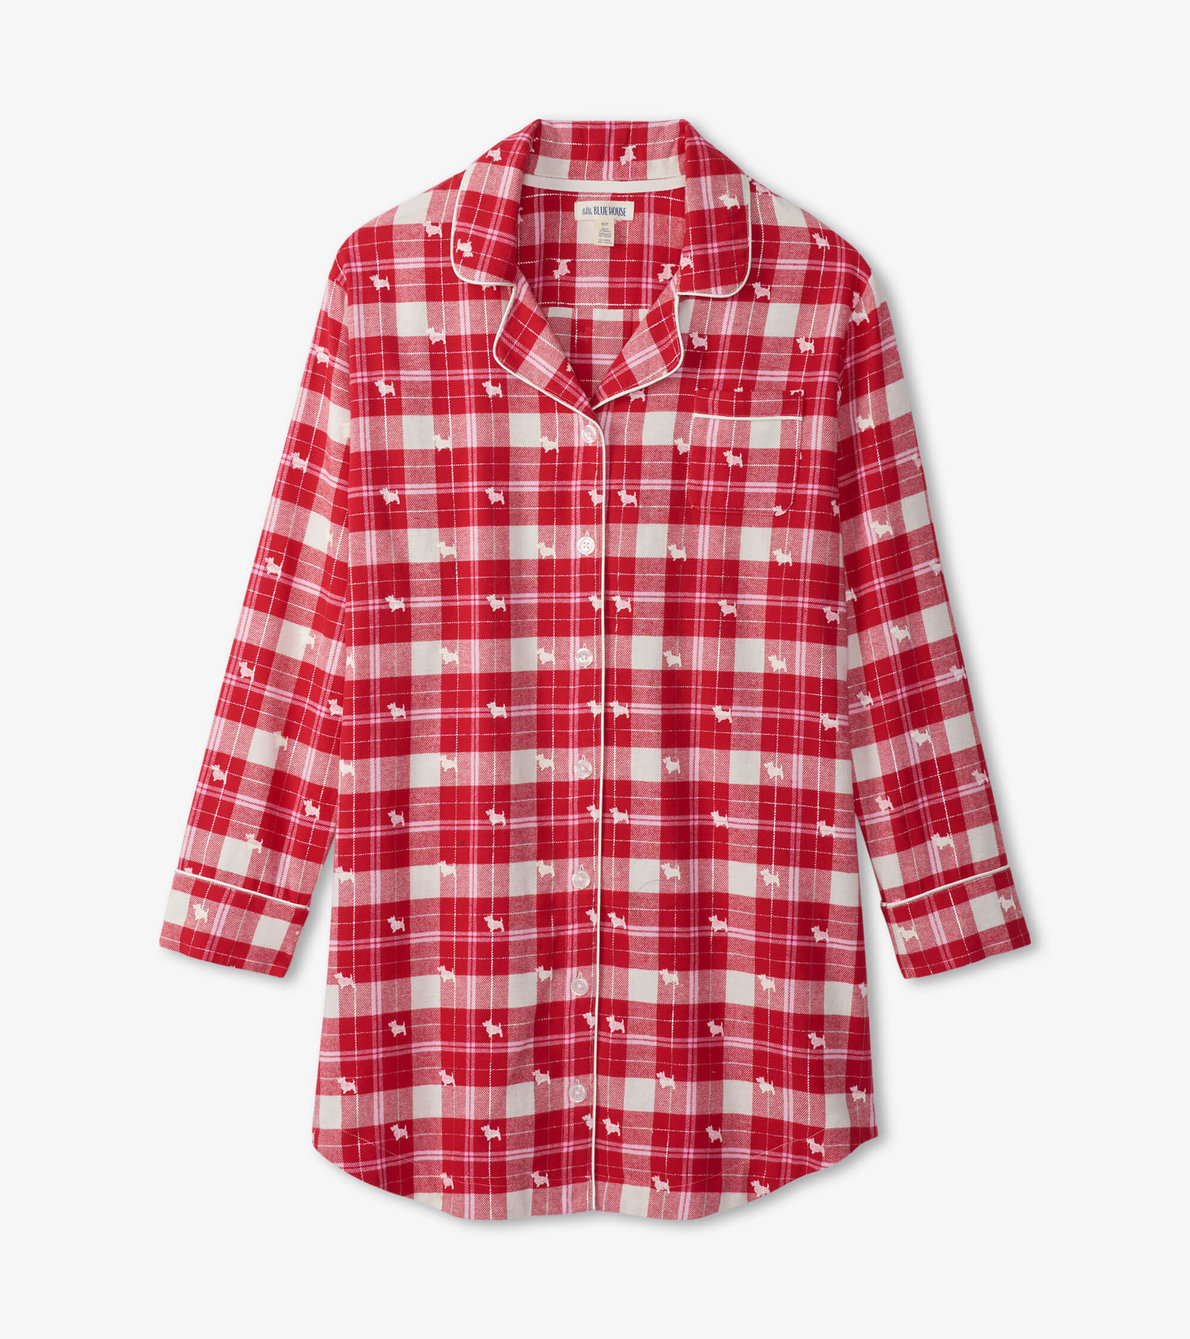 View larger image of Women's Woofing Plaid Flannel Nightgown